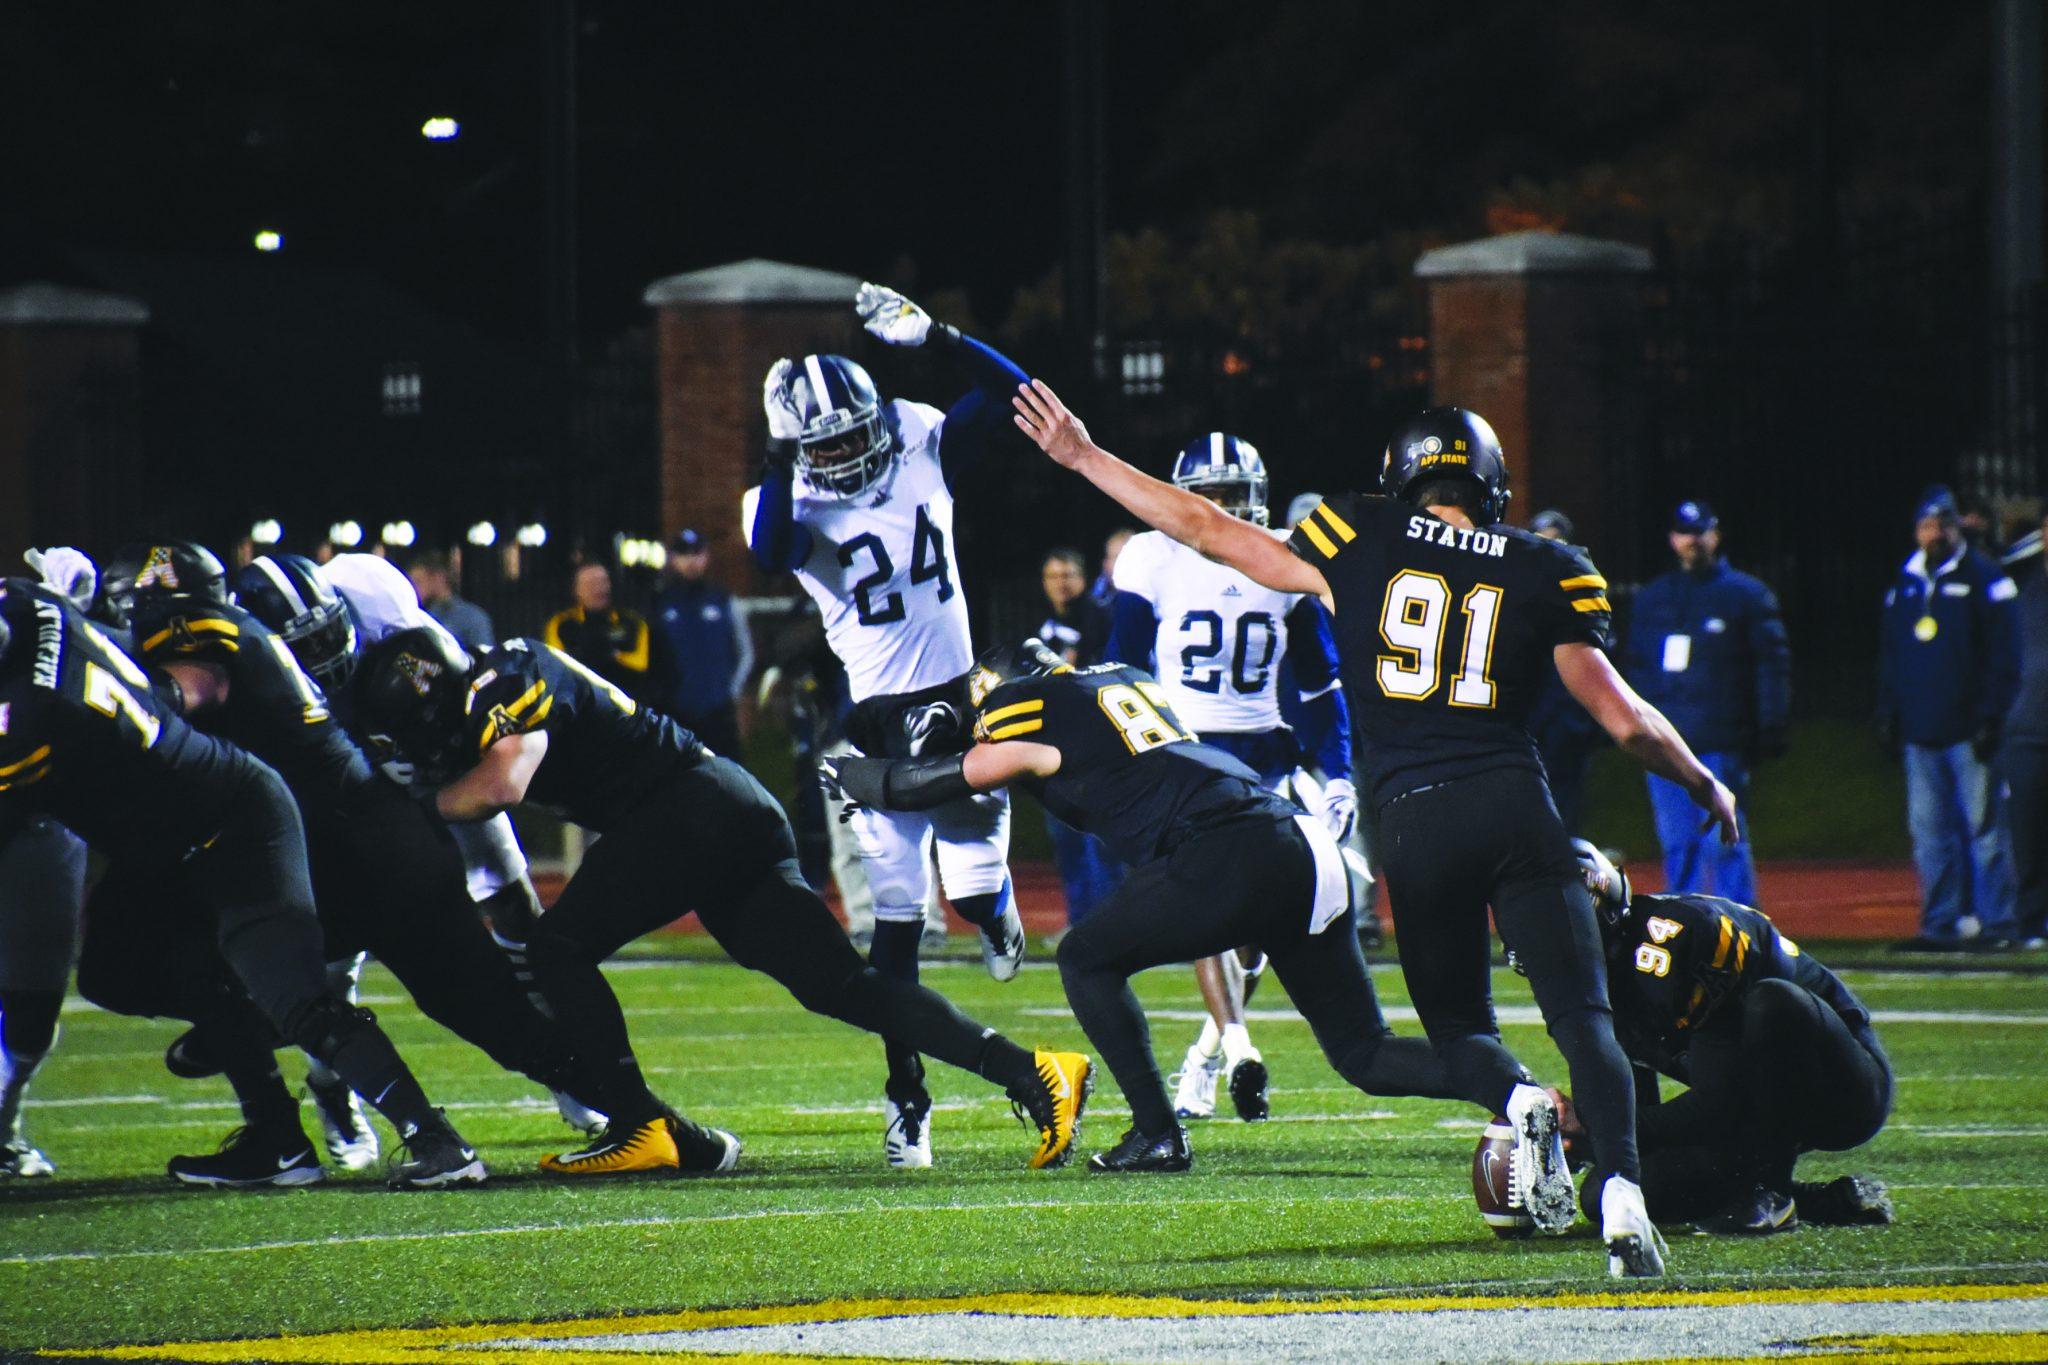 Redshirt freshman Chandler Staton made a 53-yard field goal to give App a 10-3 halftime lead
Photo: Stephanie Lee